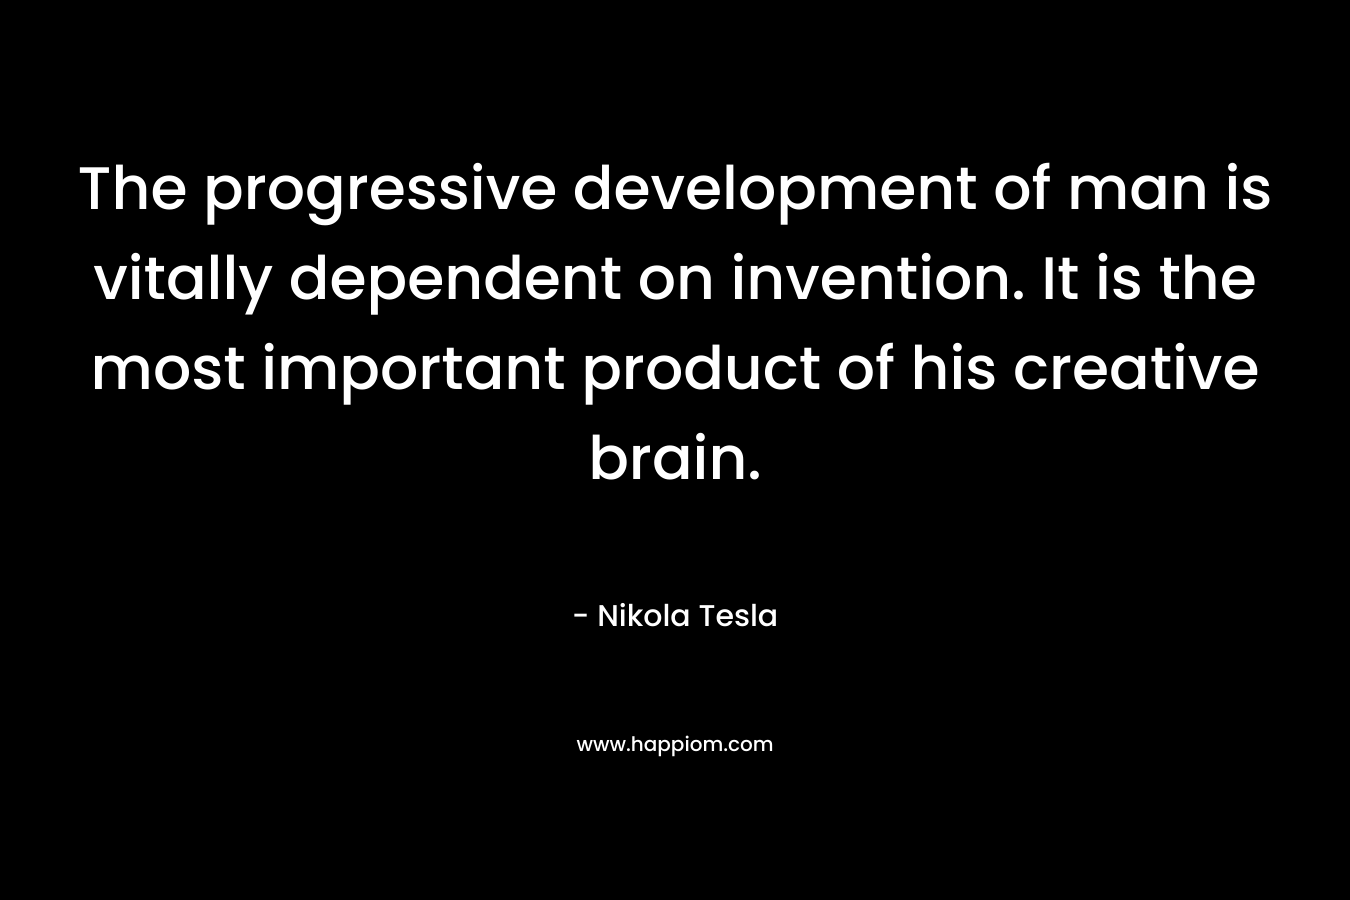 The progressive development of man is vitally dependent on invention. It is the most important product of his creative brain. – Nikola Tesla